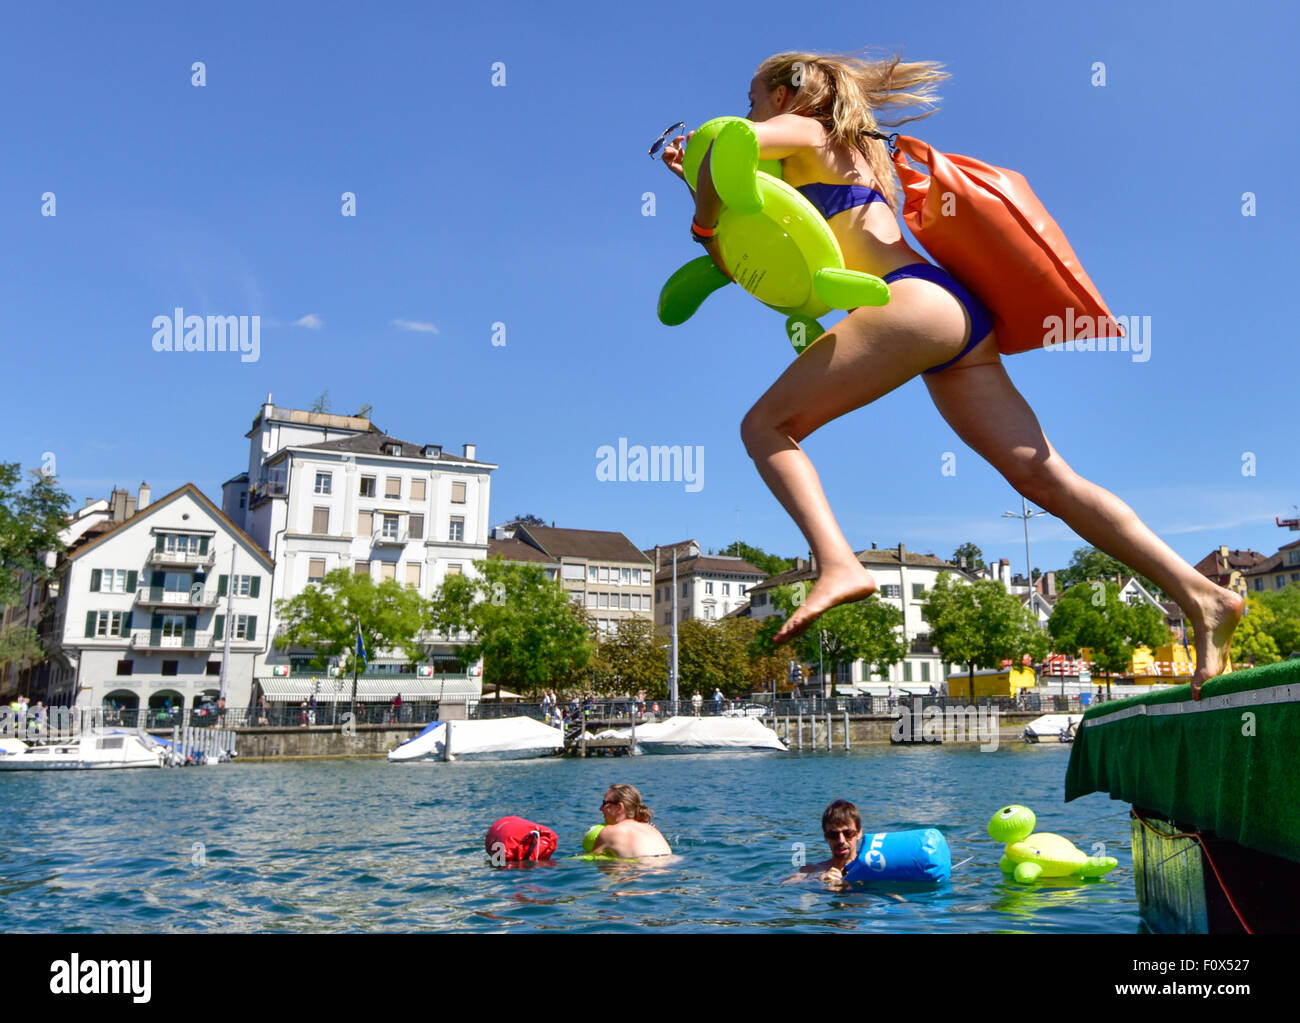 Zurich, Switzerland. 22nd August, 2015. A young woman is jumping into Zurich's cool Limmat river to drift down 2km through the city. Sunny weather and warm temperatures at Zurich's traditional 'Limmatschwimmen' ('swim down the Limmat river') attracted 4500 swimmers who, equipped with rubber turtles and other fancy floating devices, enjoyed drifting down the river through Zurich. Credit:  Erik Tham/Alamy Live News Stock Photo